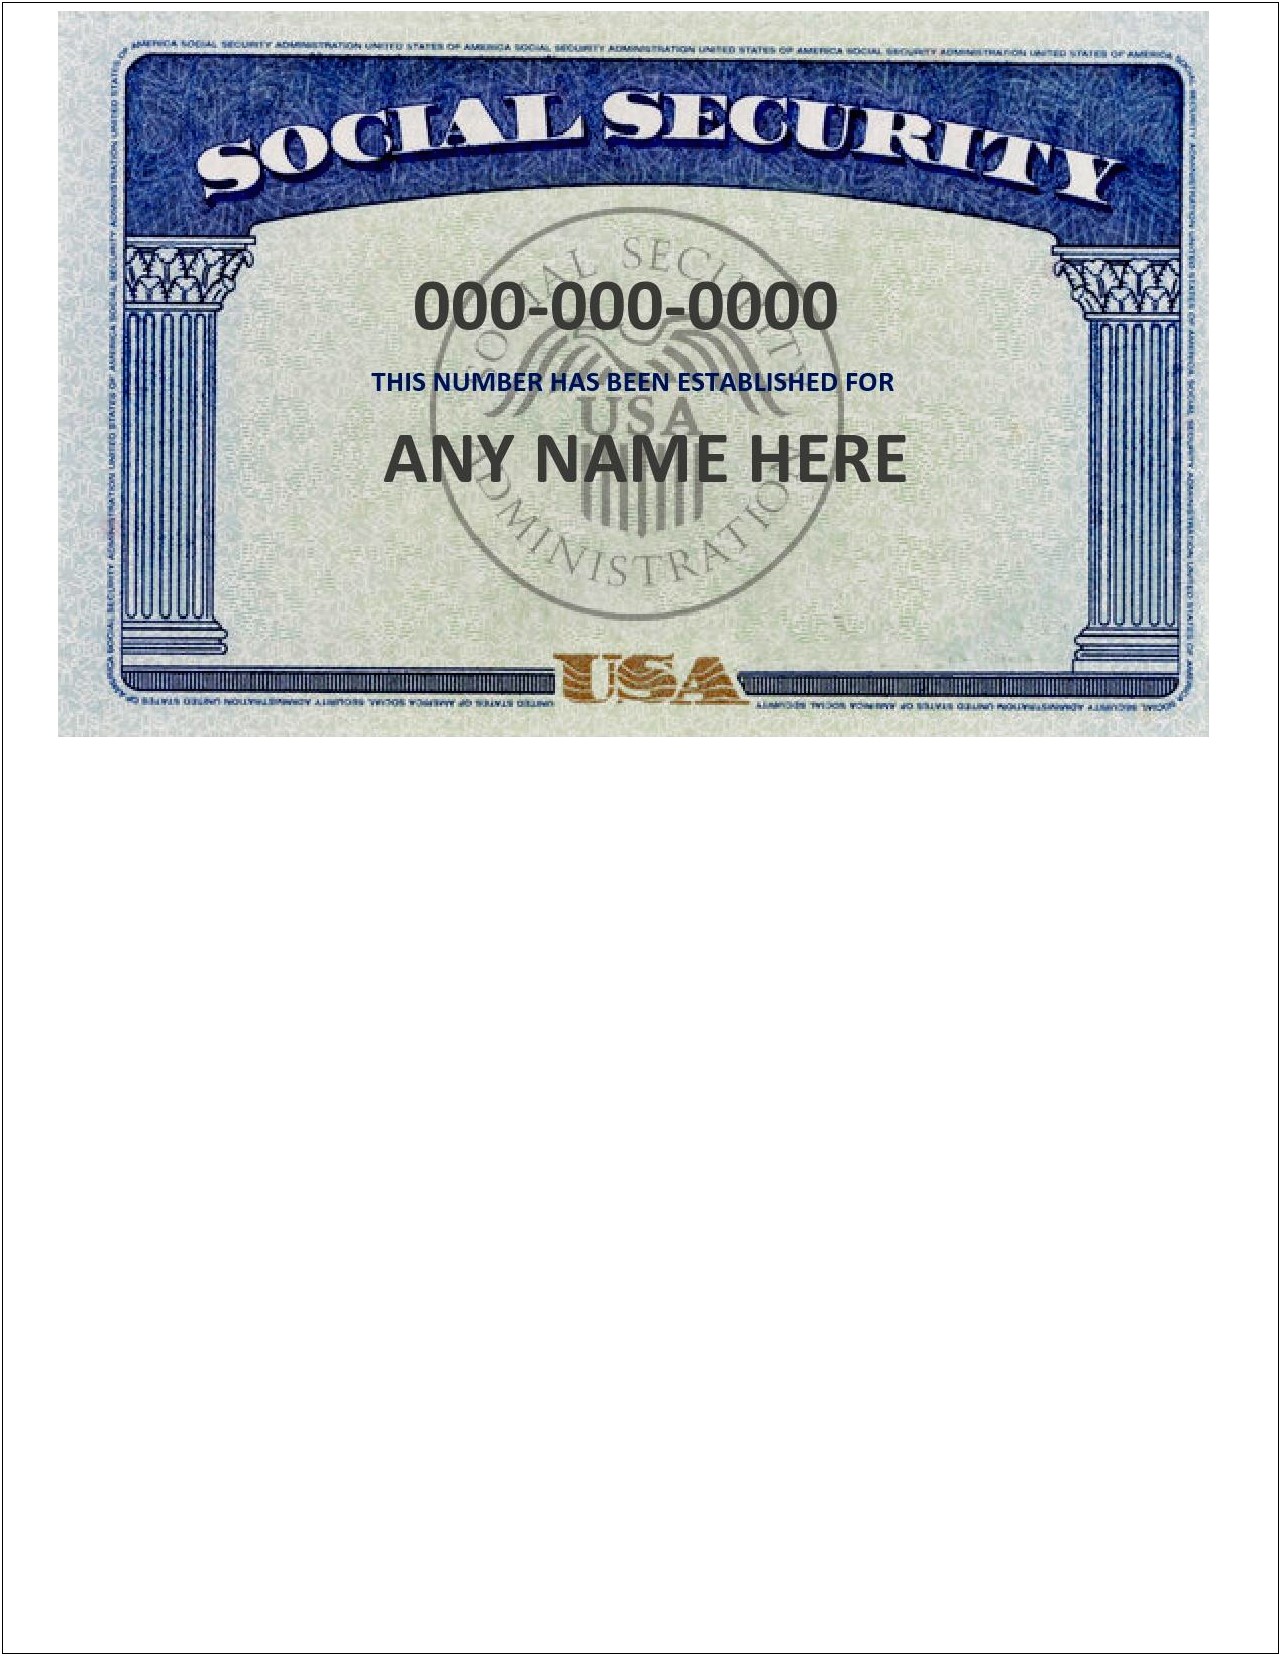 Novelty Social Security Card Template Download